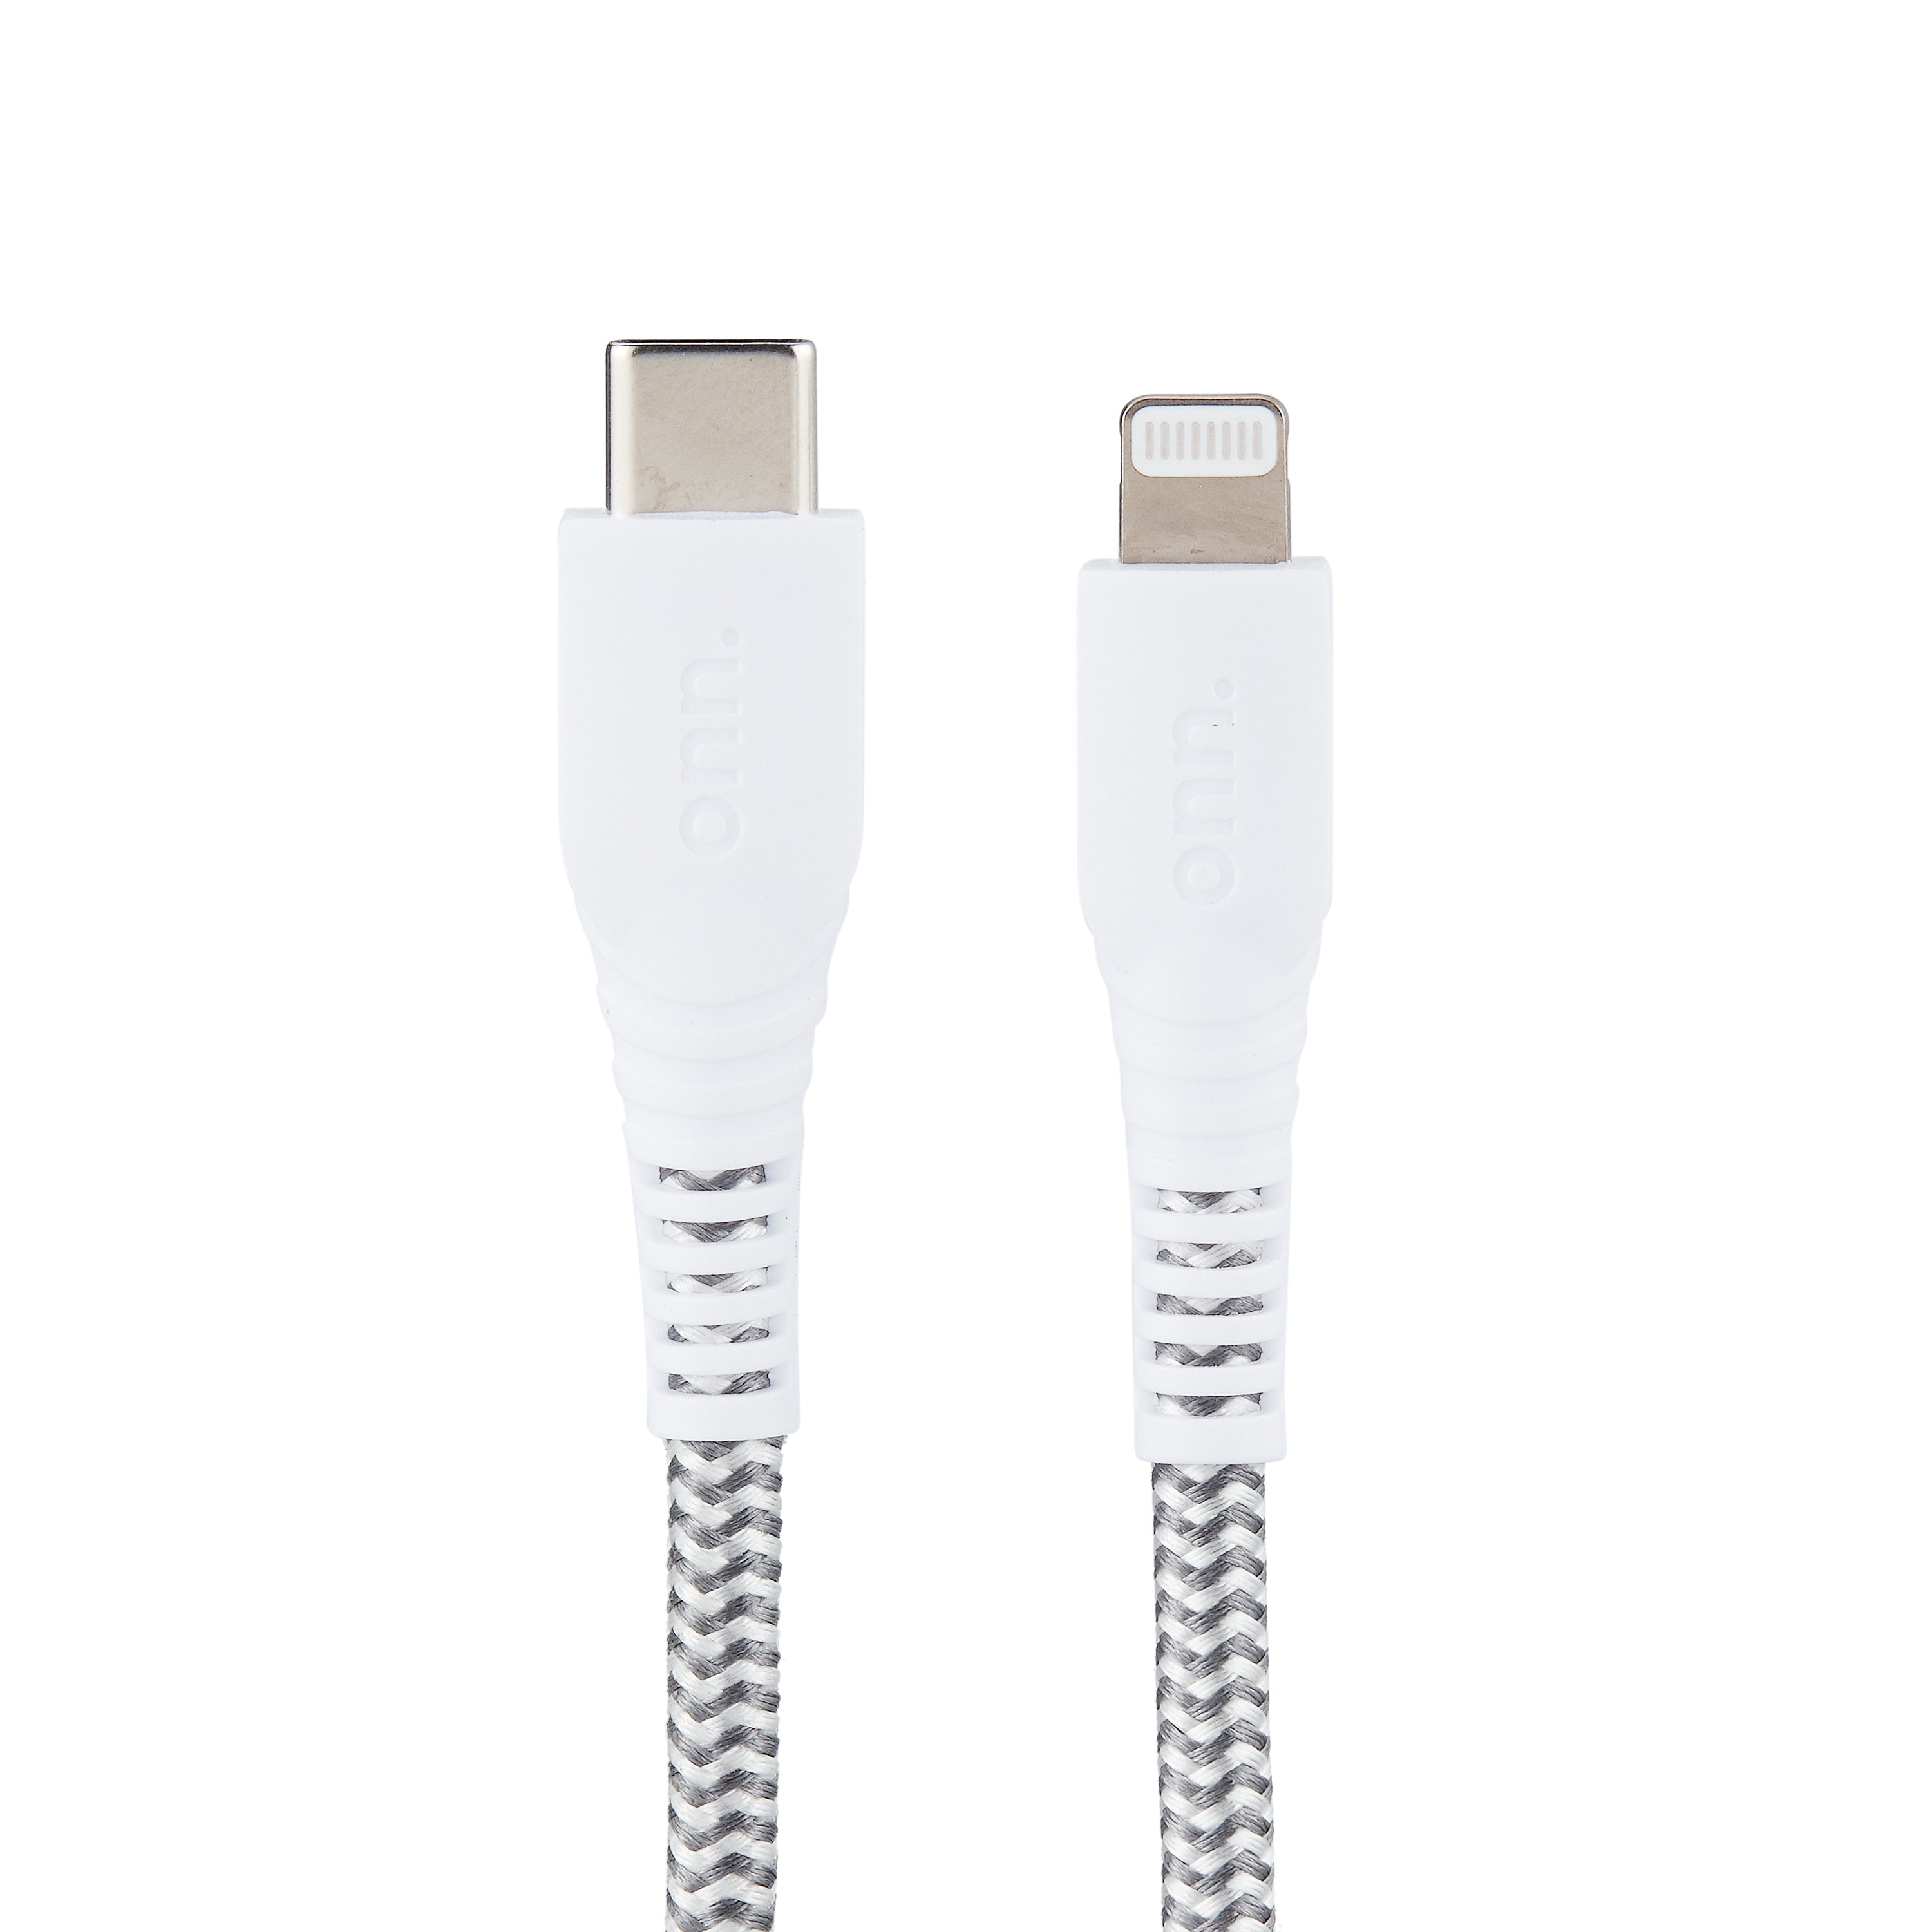 Onn WIAWHT100010801 6' Braided Charging Cable, White for Apple iPhone